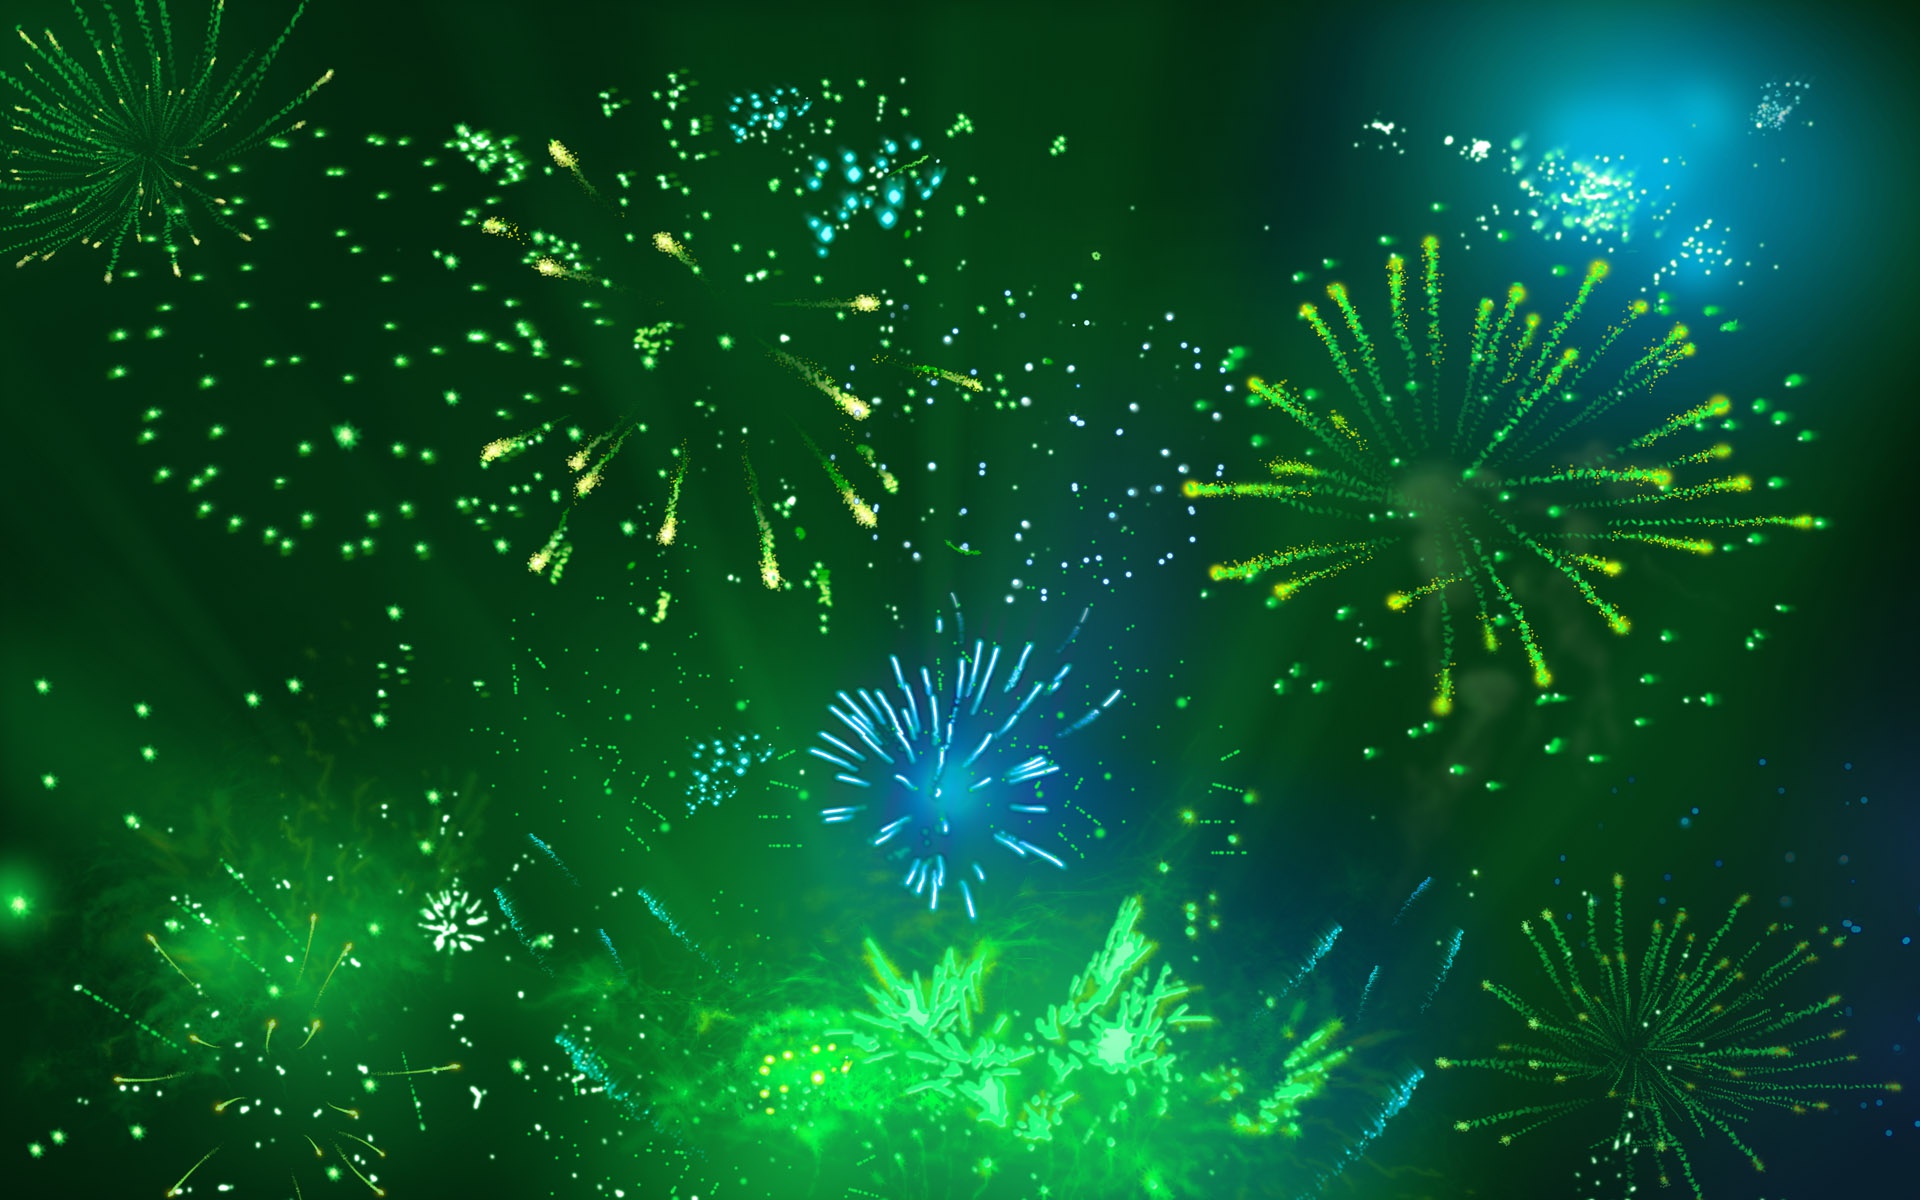 Download wallpapers green fireworks, festive fireworks, green background,  festival, background with fireworks for desktop with resolution 1920x1200.  High Quality HD pictures wallpapers